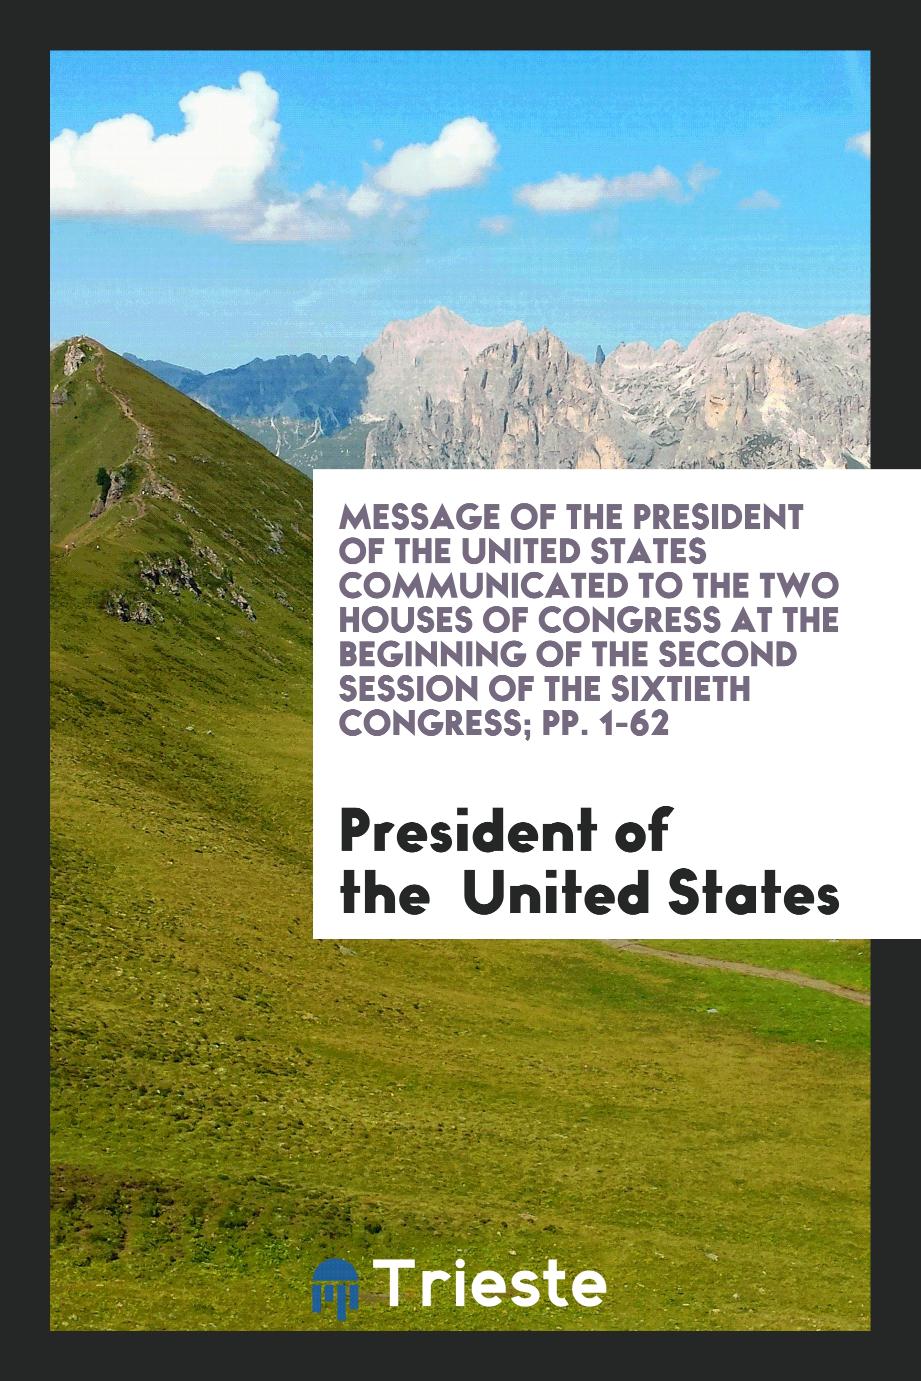 Message of the President of the United States Communicated to the Two Houses of Congress at the Beginning of the Second Session of the sixtieth Congress; pp. 1-62